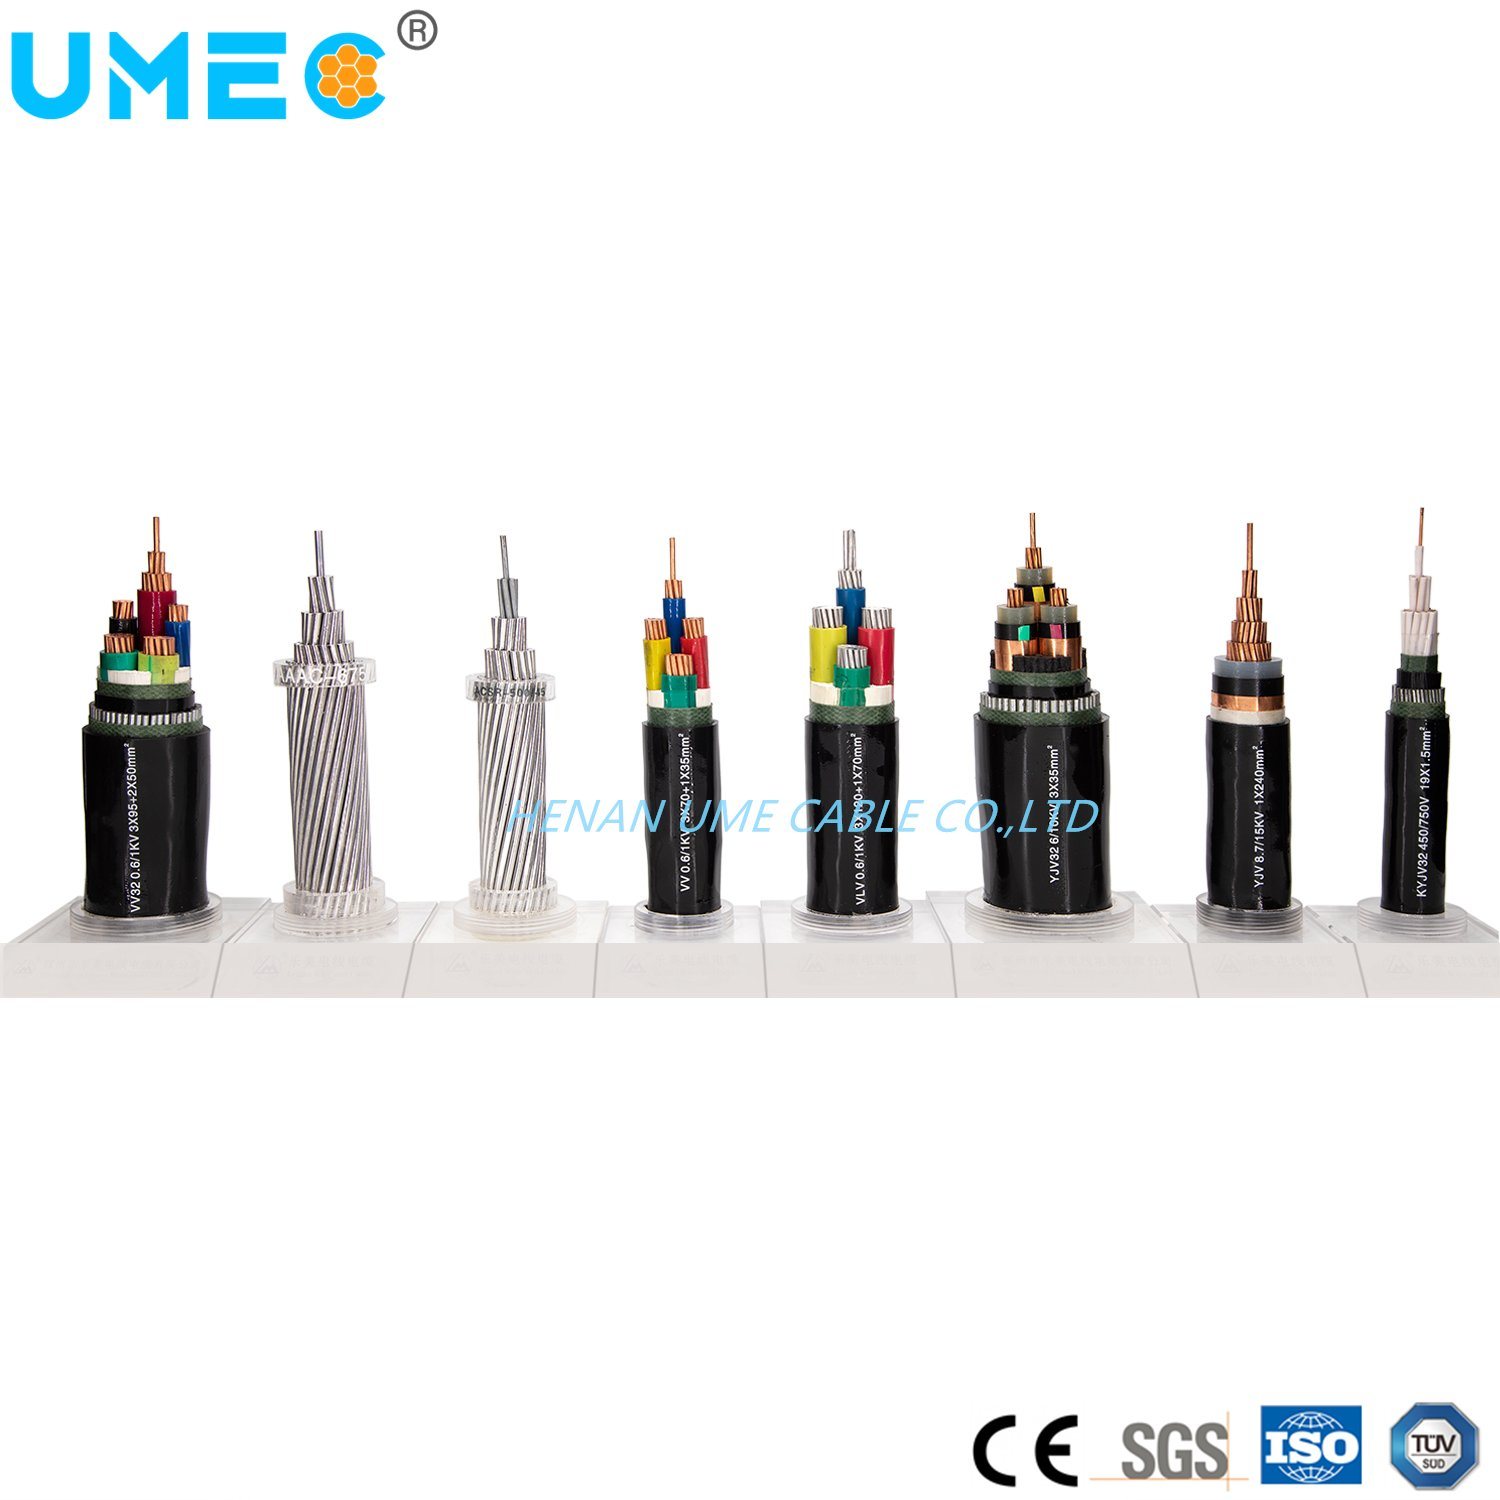 Power Cable LV Mv Underground Overhead Electric Wire for Distribution